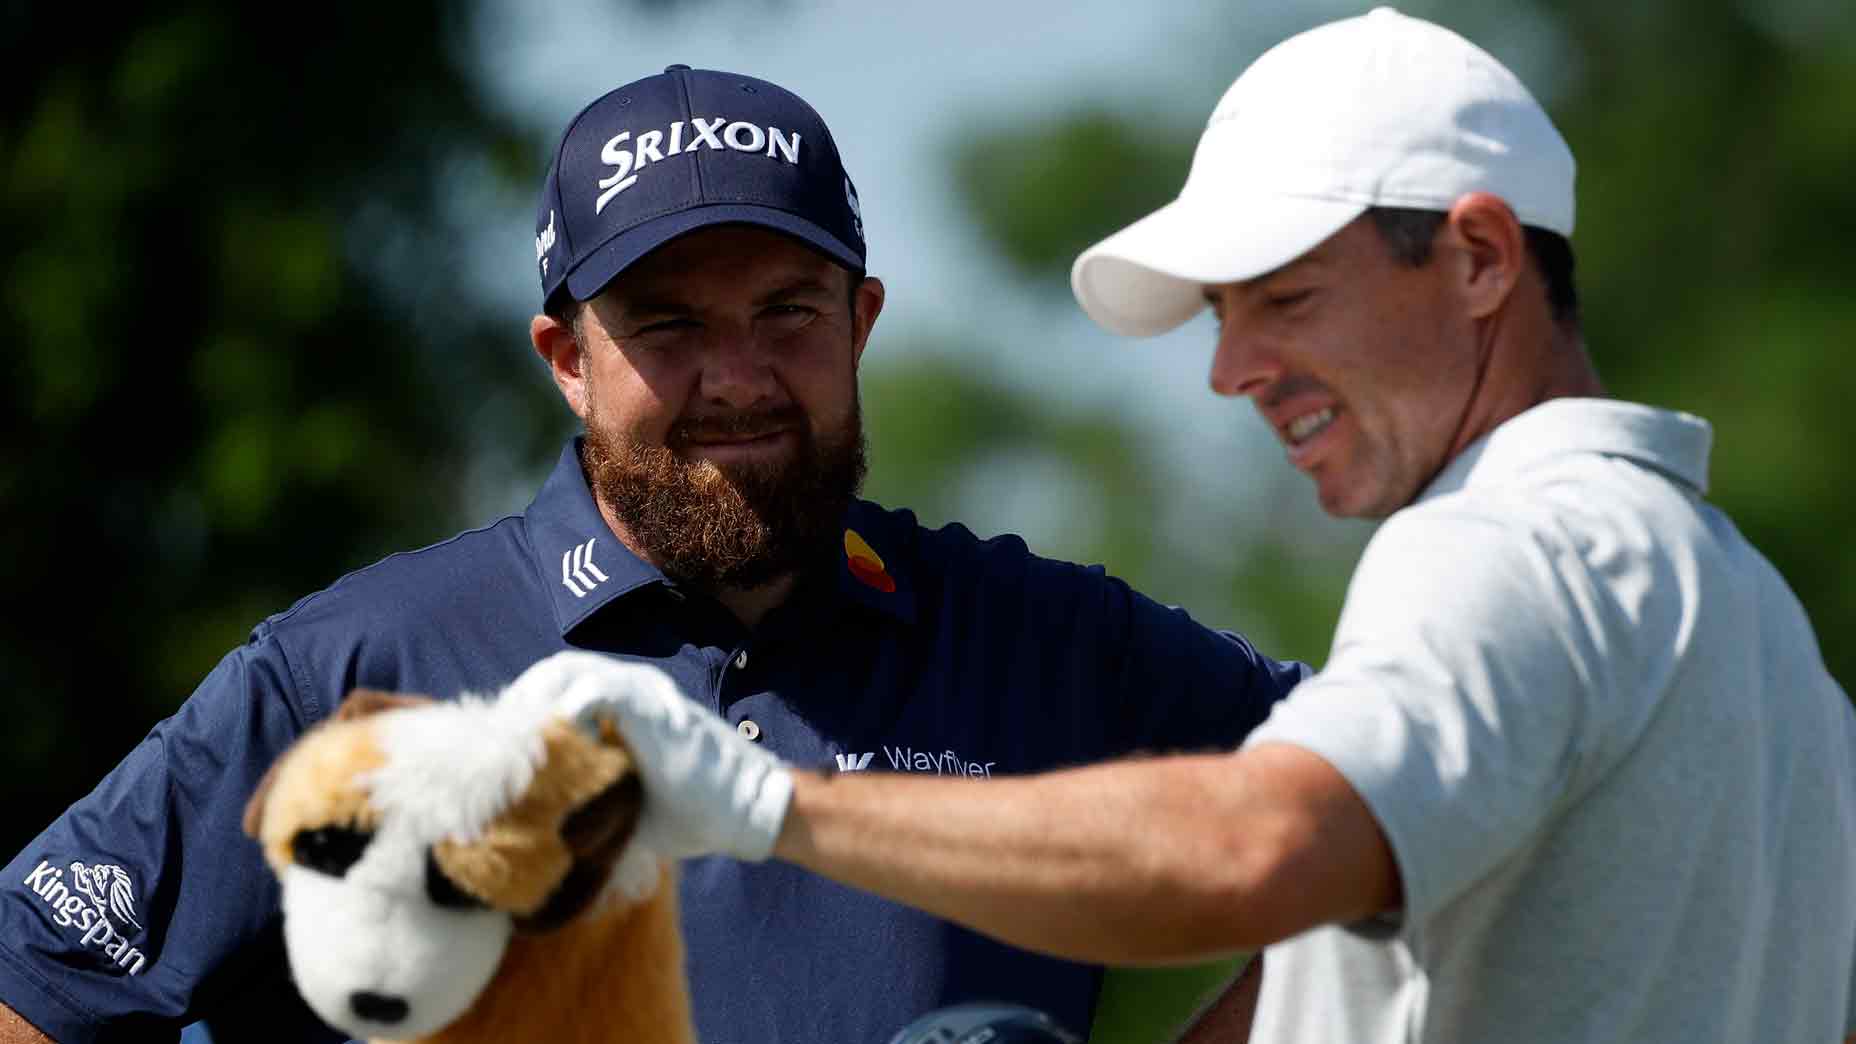 Shane Lowry's advice for pro-am partners is good for every golfer